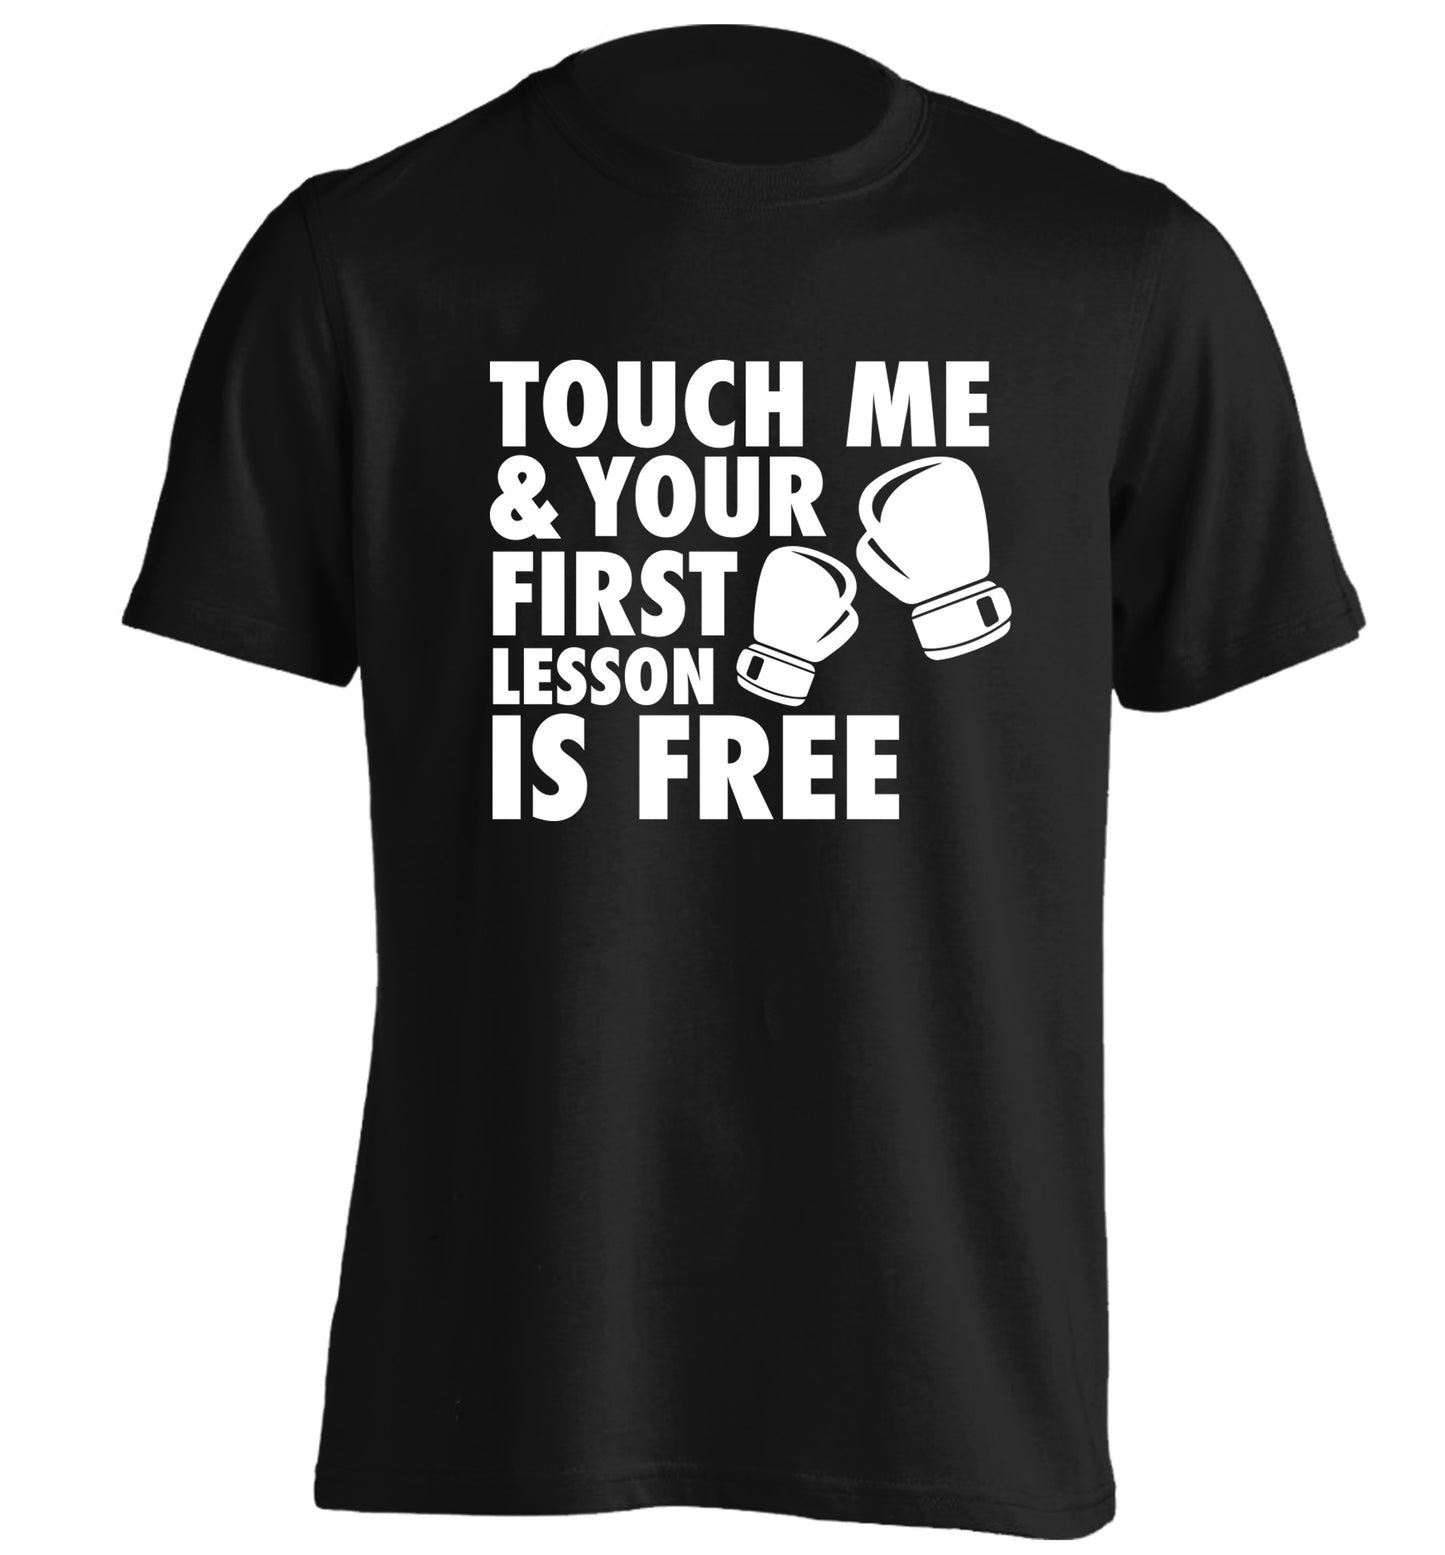 Touch me and your First Lesson is Free  adults unisex black Tshirt 2XL